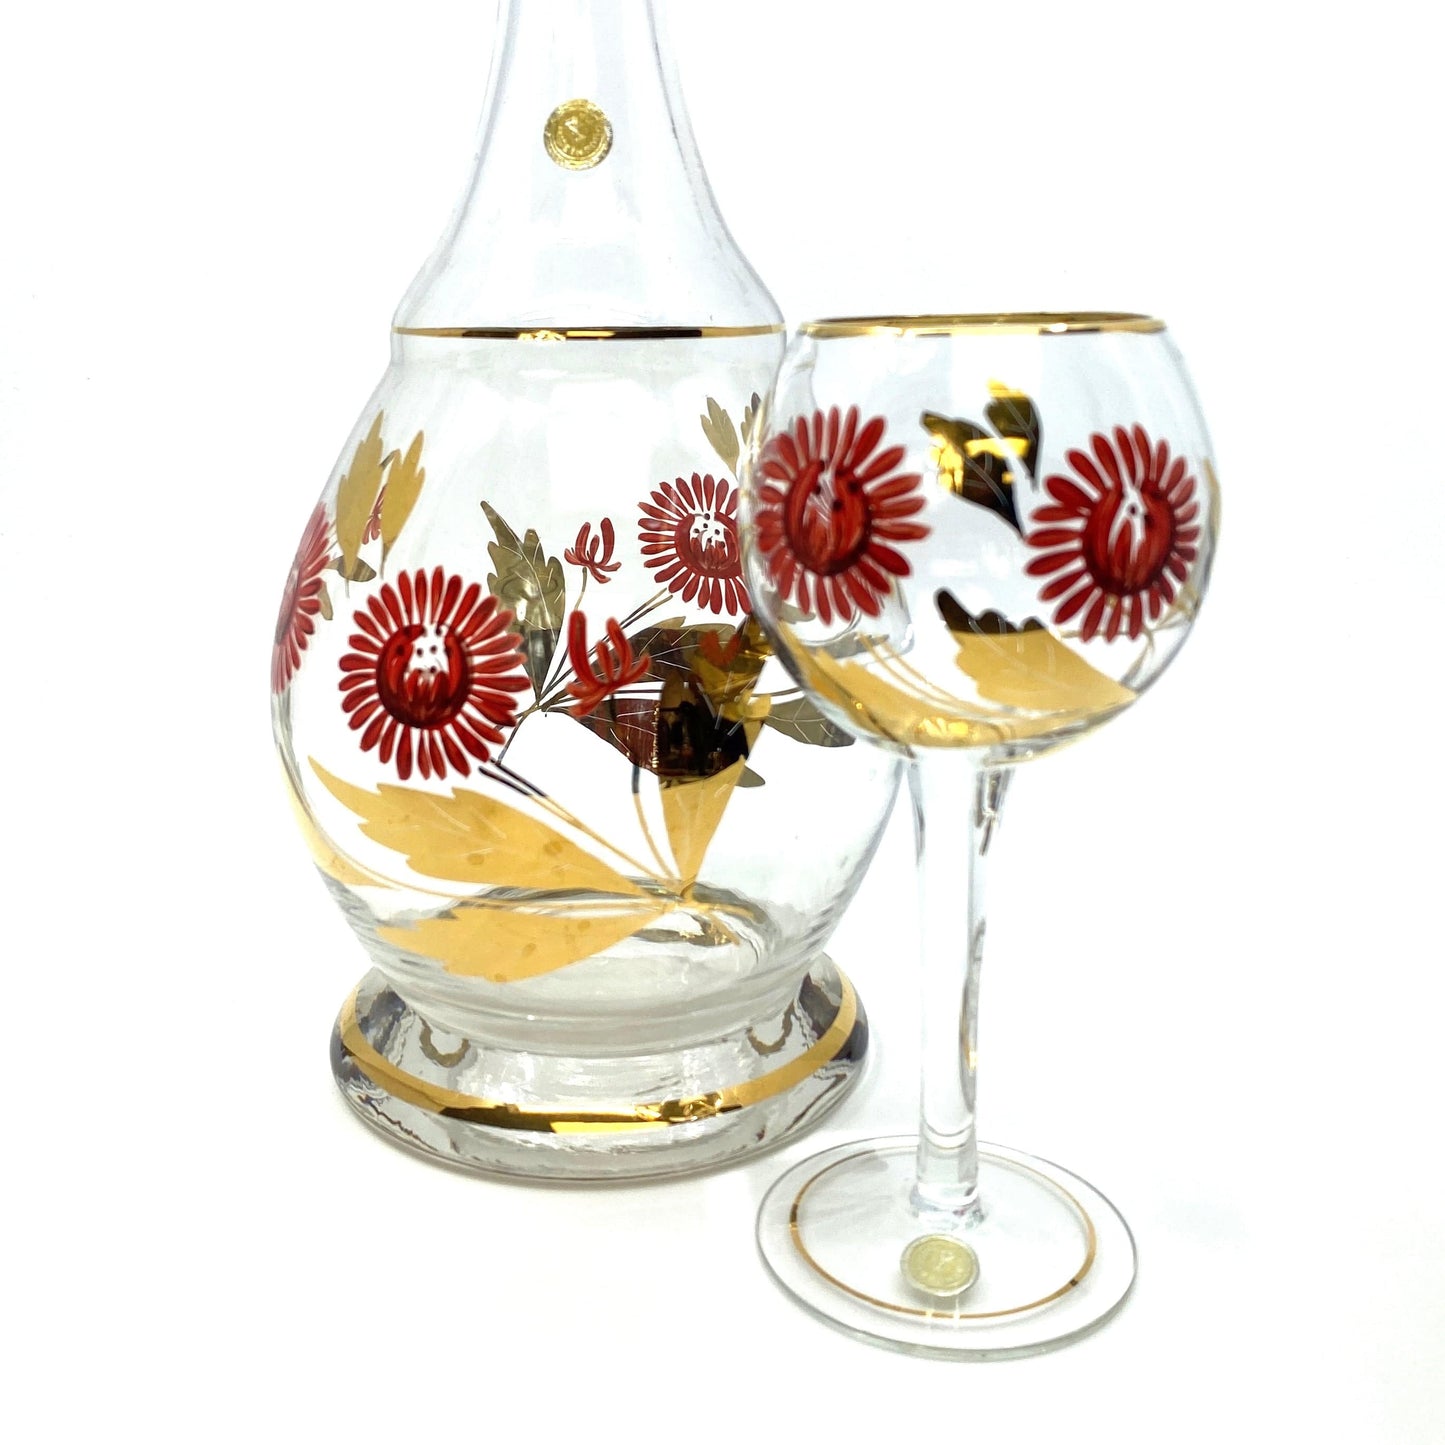 Vintage Decanter and Stemmed Glasses Made in Romania Red Flowers Gold Leaves - 7 Piece Set